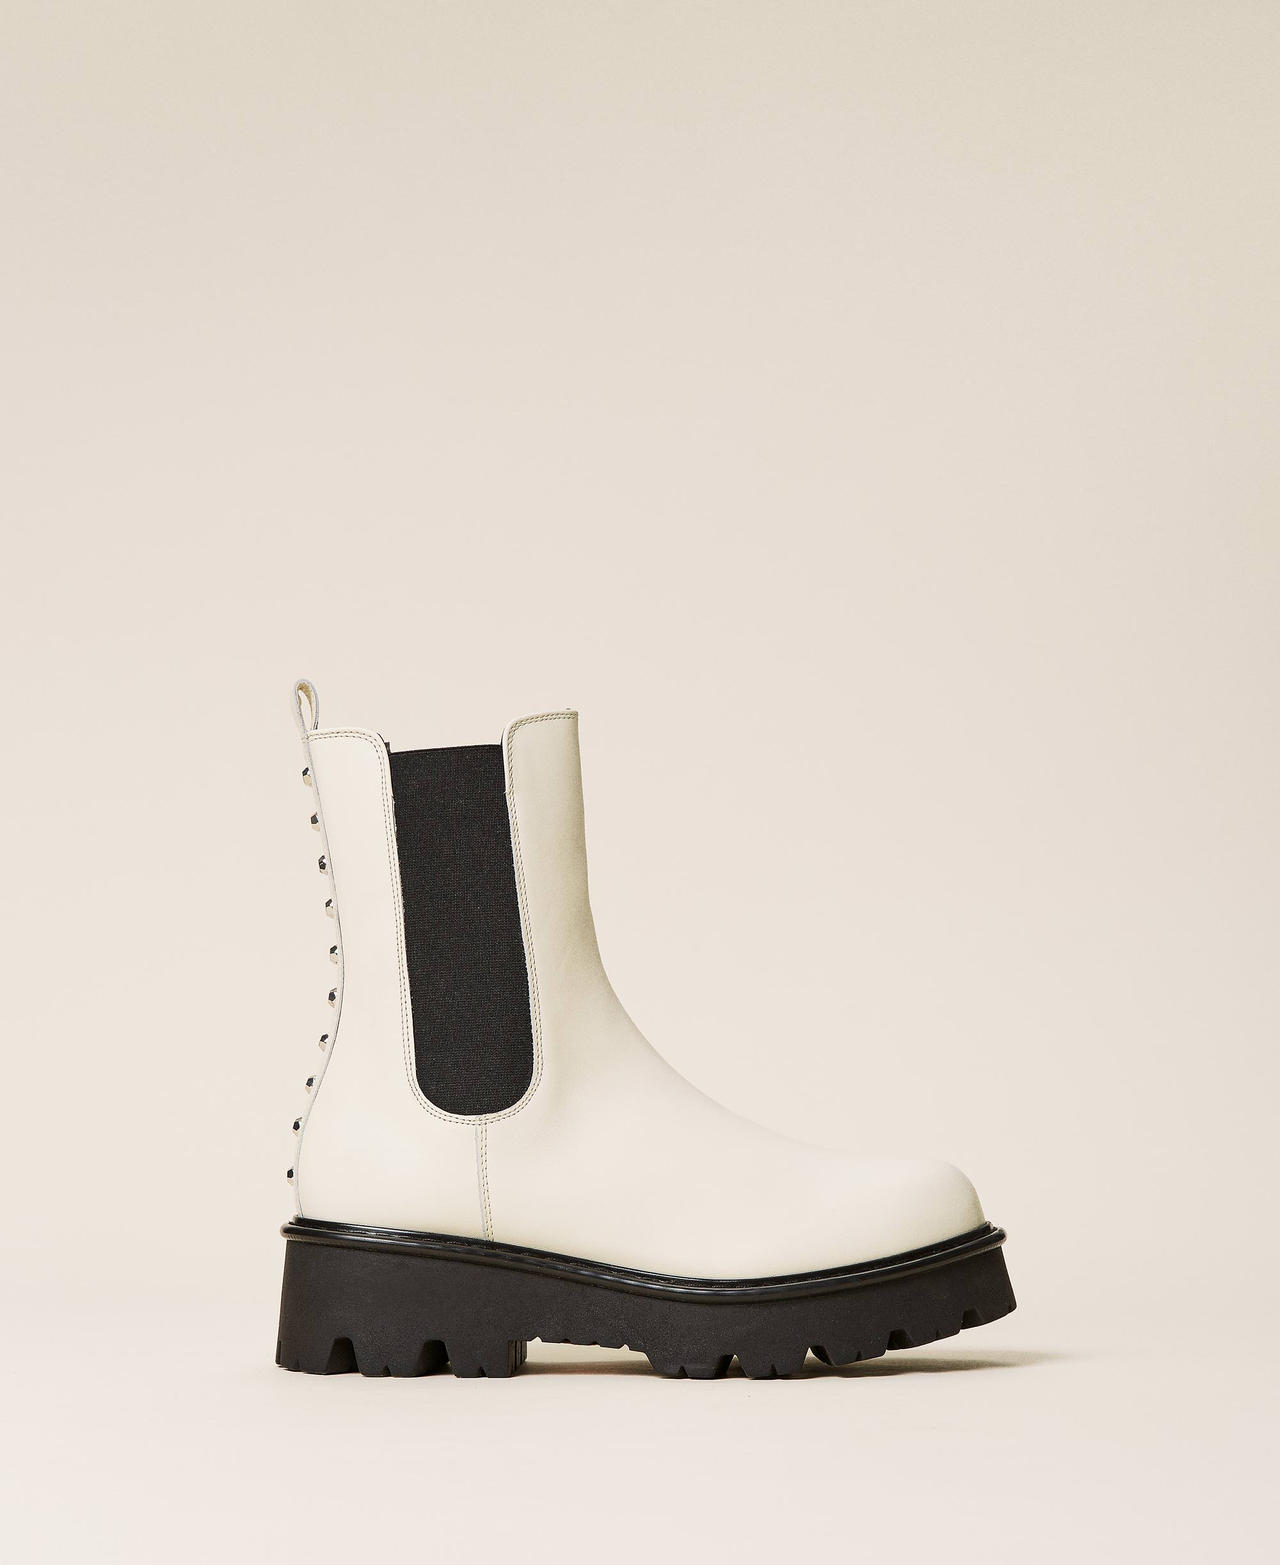 Leather ankle boots with studs Off White Woman 212TCT012-03